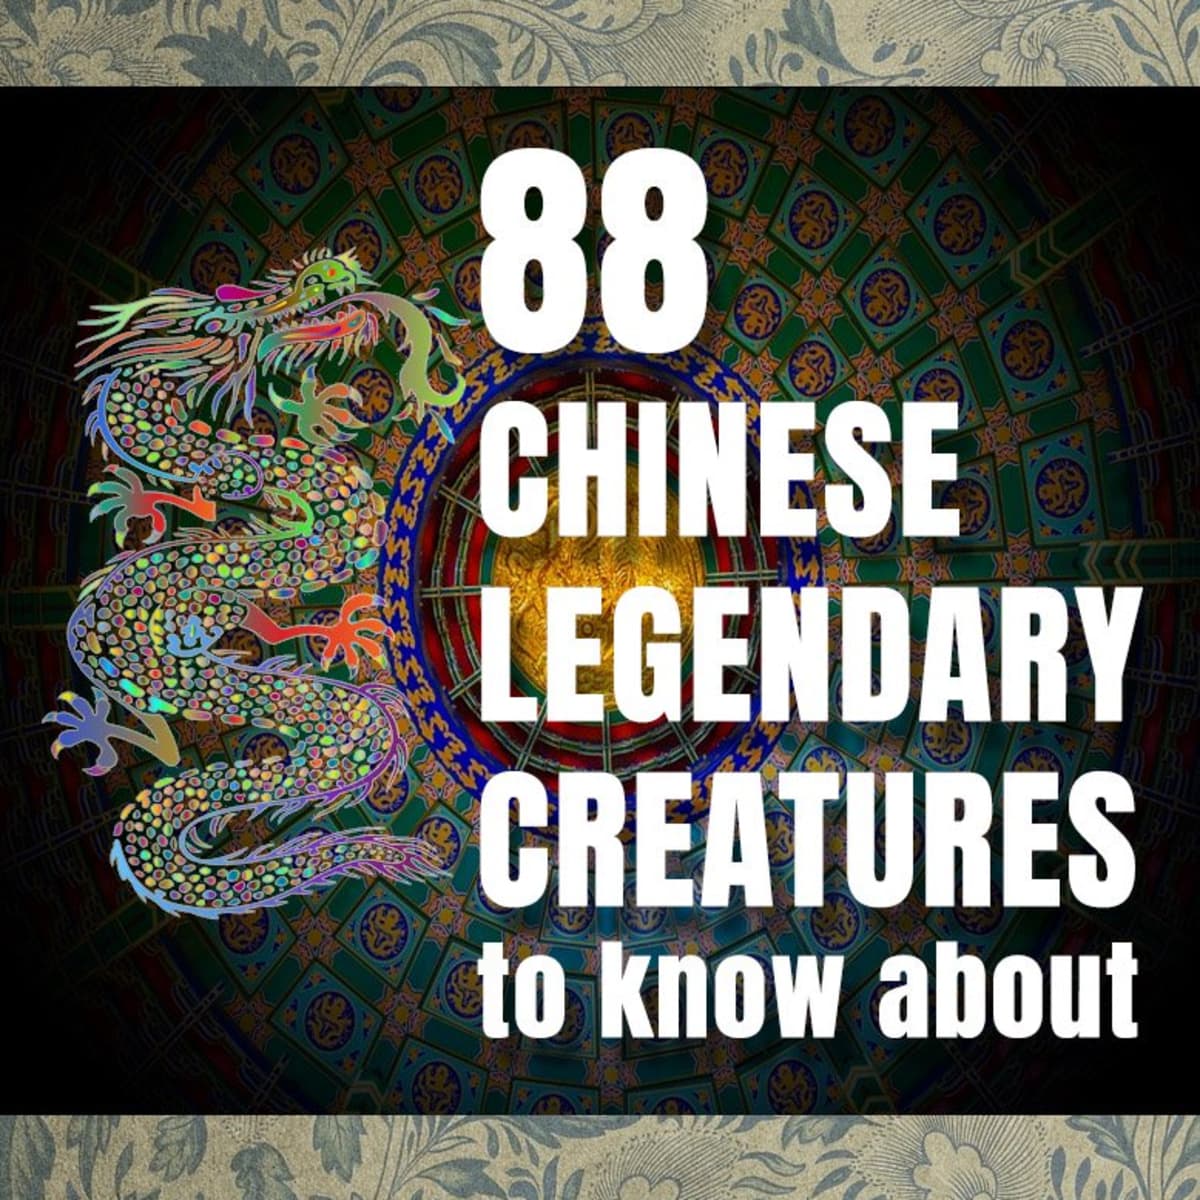 88 Chinese Mythical Creatures to Know About - Owlcation